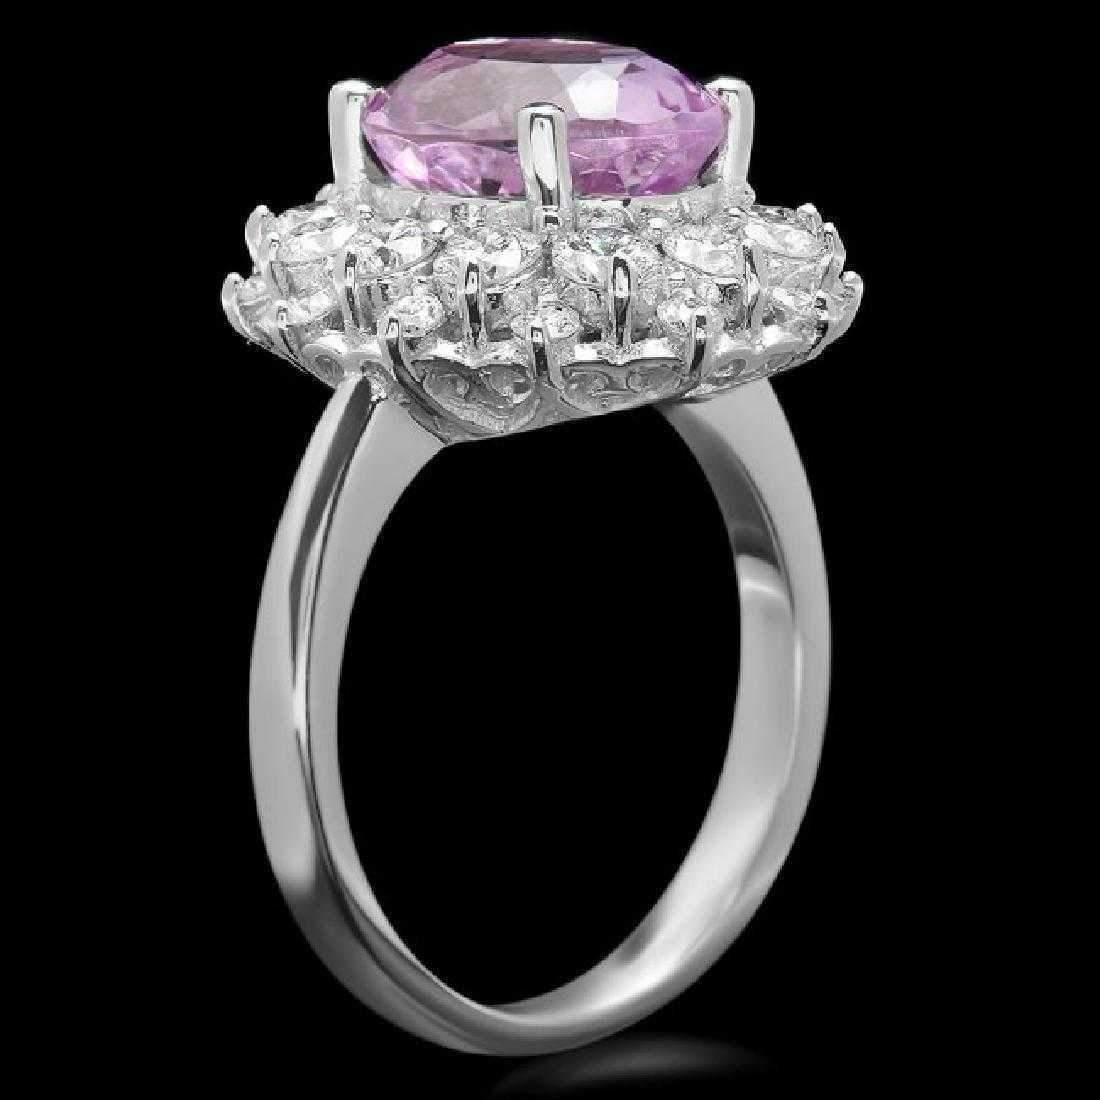 6.30 Carats Natural Kunzite and Diamond 14K Solid White Gold Ring

Total Natural Oval Cut Kunzite Weights: Approx. 5.00 Carats

Kunzite Measures: Approx. 11.00 x 9.00mm

Natural Round Diamonds Weight: Approx. 1.30 Carats (color G-H / Clarity